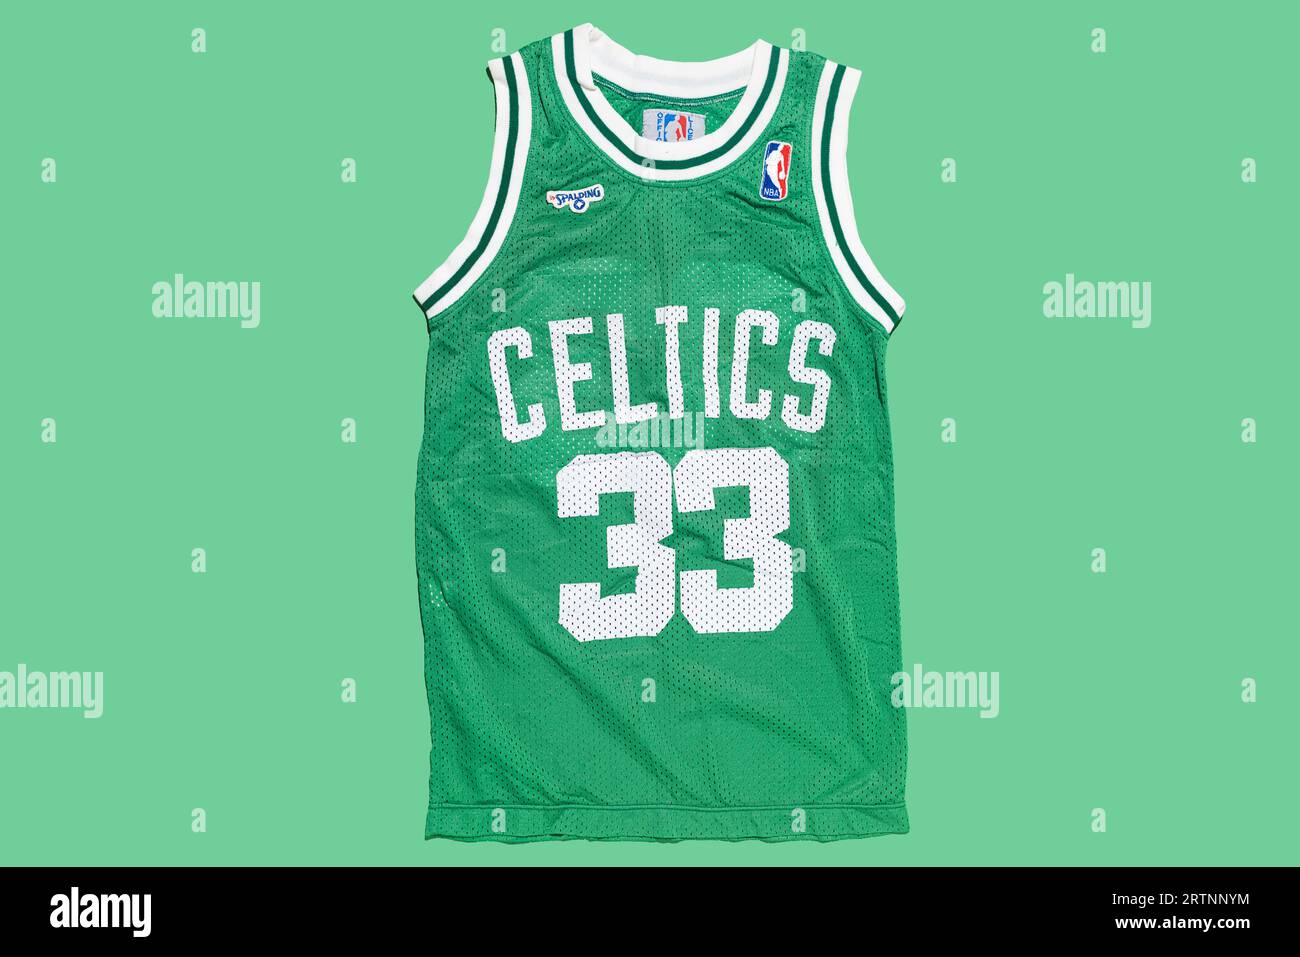 Boston Celtics retro green basketball jersey with Larry Bird's number 33, on a green background. Basketball, spalding, sports equipment and basketball Stock Photo